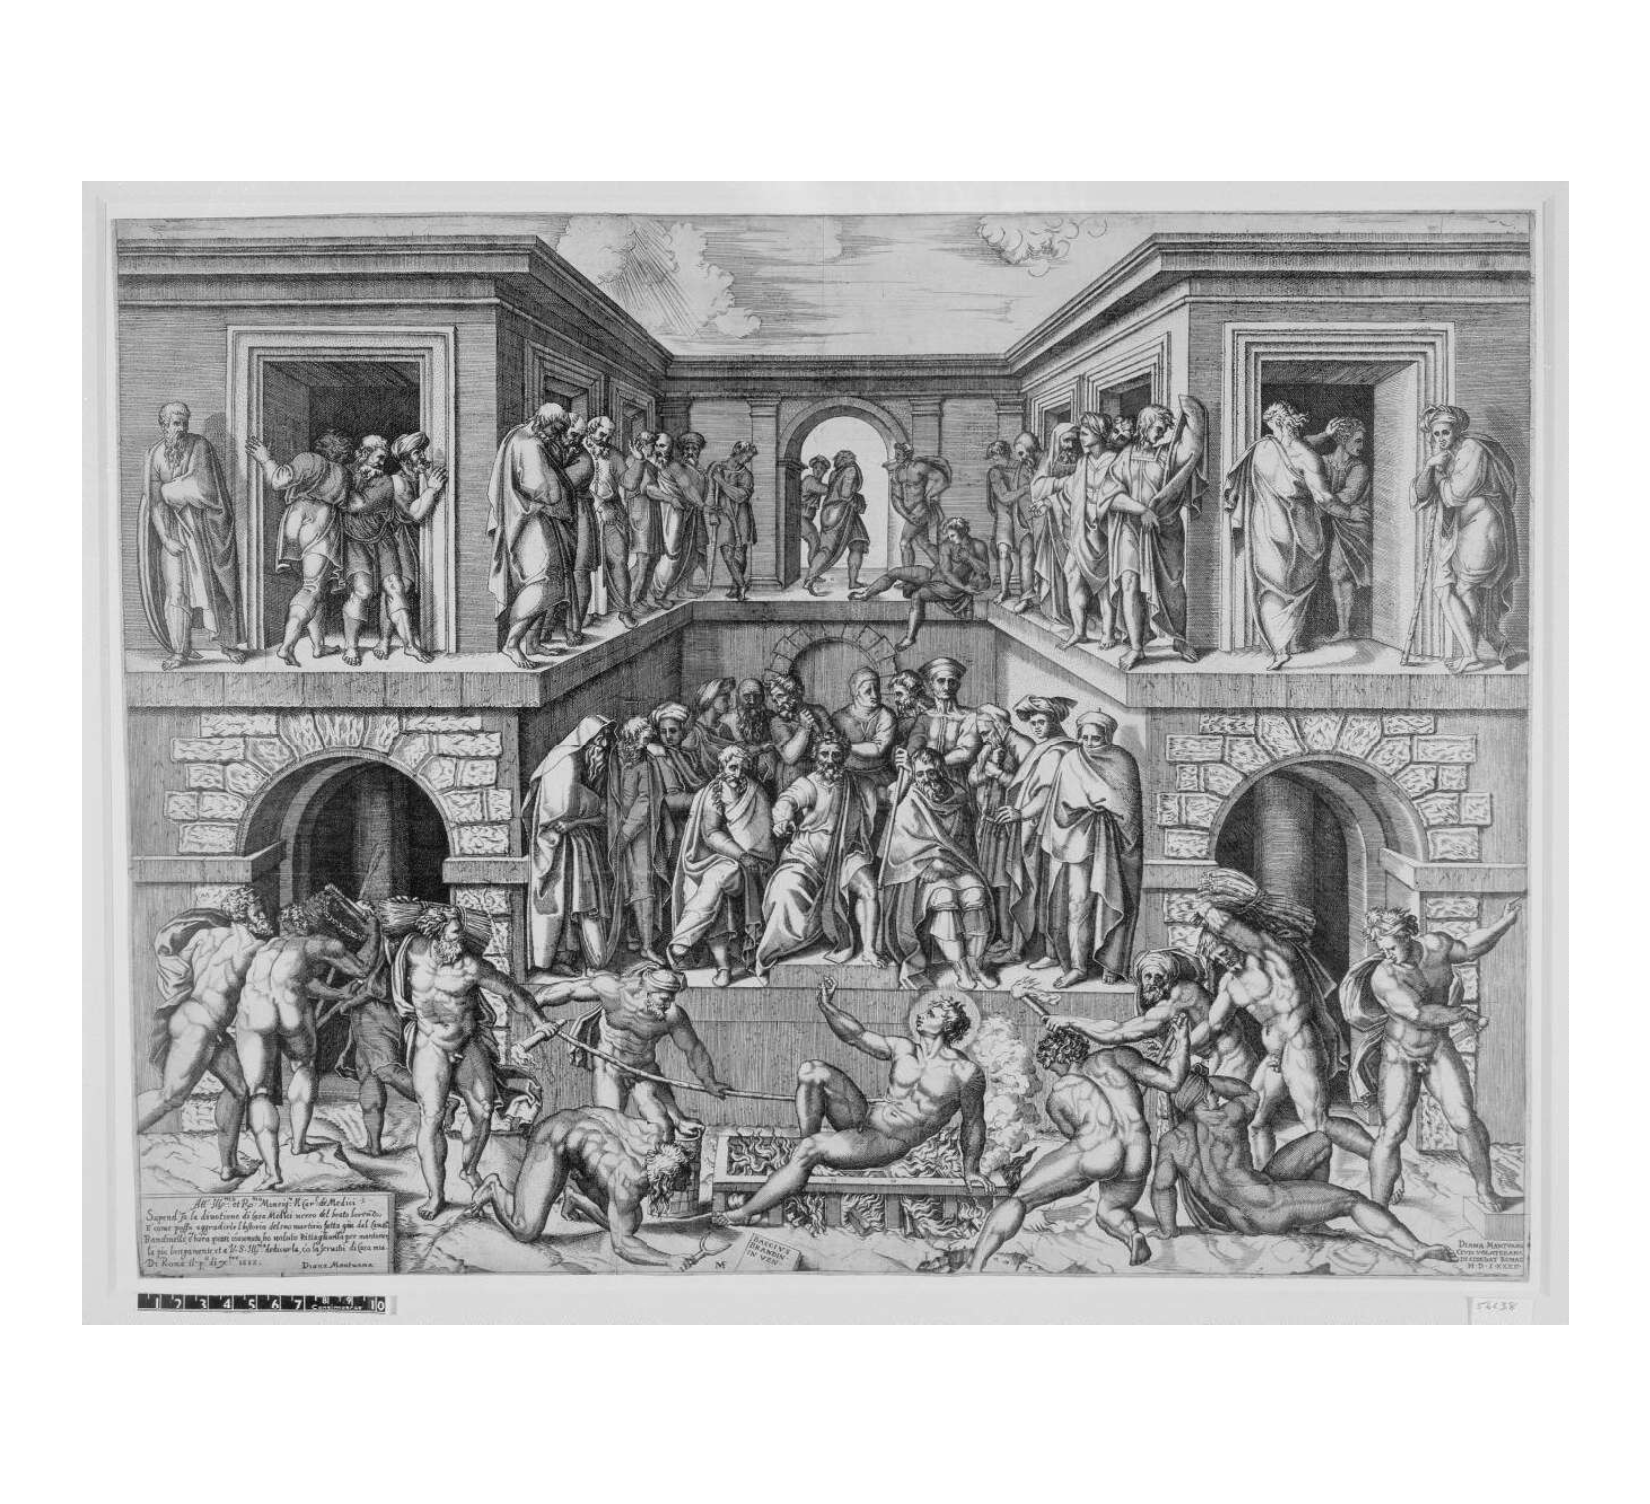 A printed image of a building with two levels, open over a courtyard. Both levels are filled with figures. At the bottom level center, Saint Lawrence appears nude, sitting on a bed of hot coals. He is nude with a halo around his head, and he reaches up towards the seated Roman Emperor with one outstretched hand. 